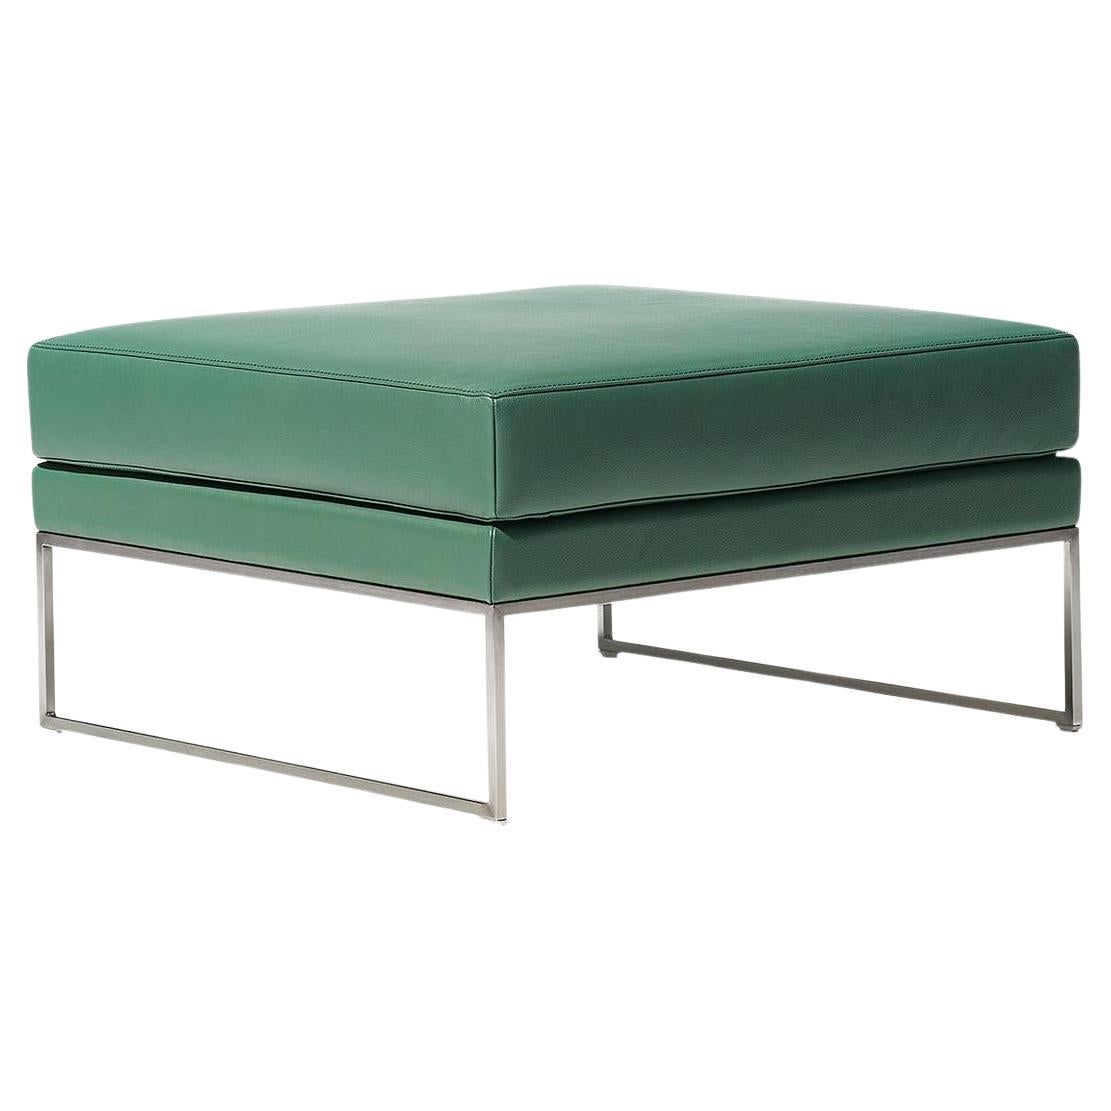 De Sede DS-160 Stool in Turquoise Leather Upholstery by De Sede Design Team